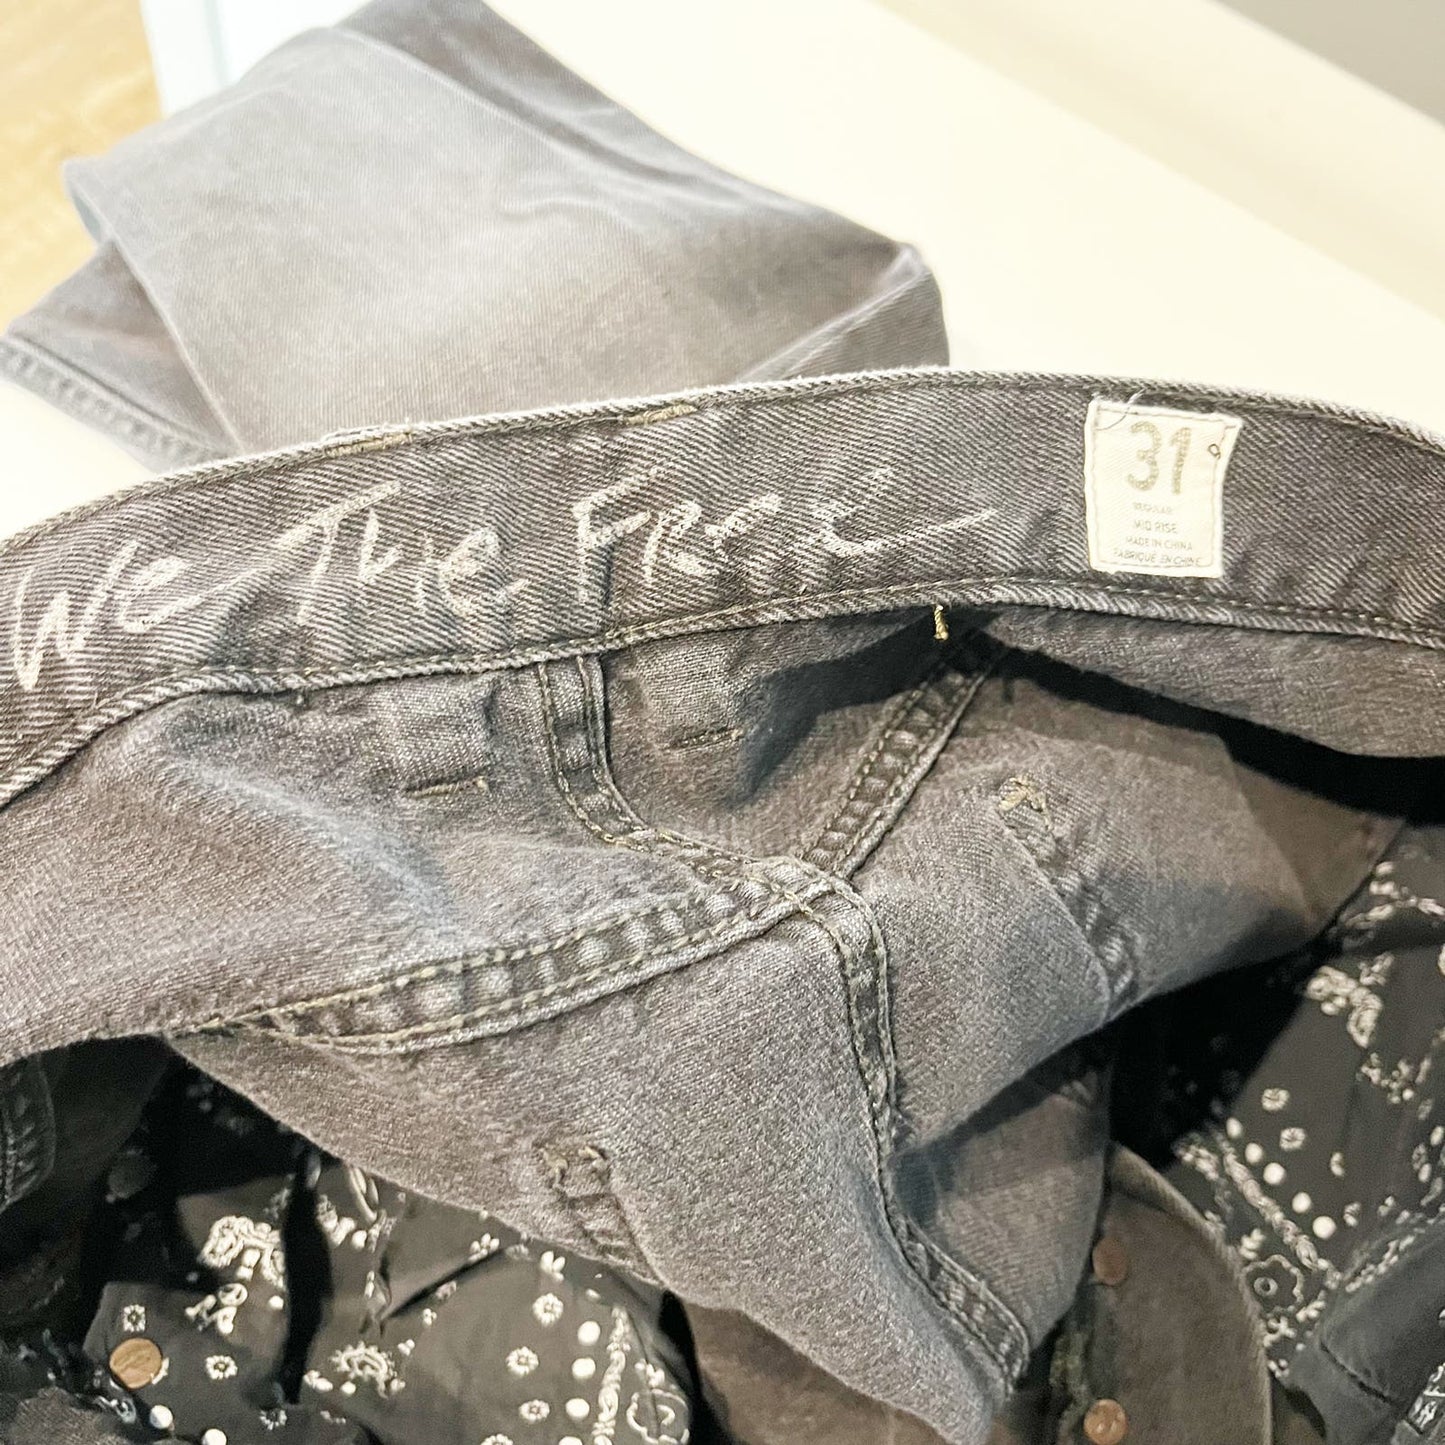 Free People We The Free Chewed Up Midrise Straight Jeans Black 31 / 12